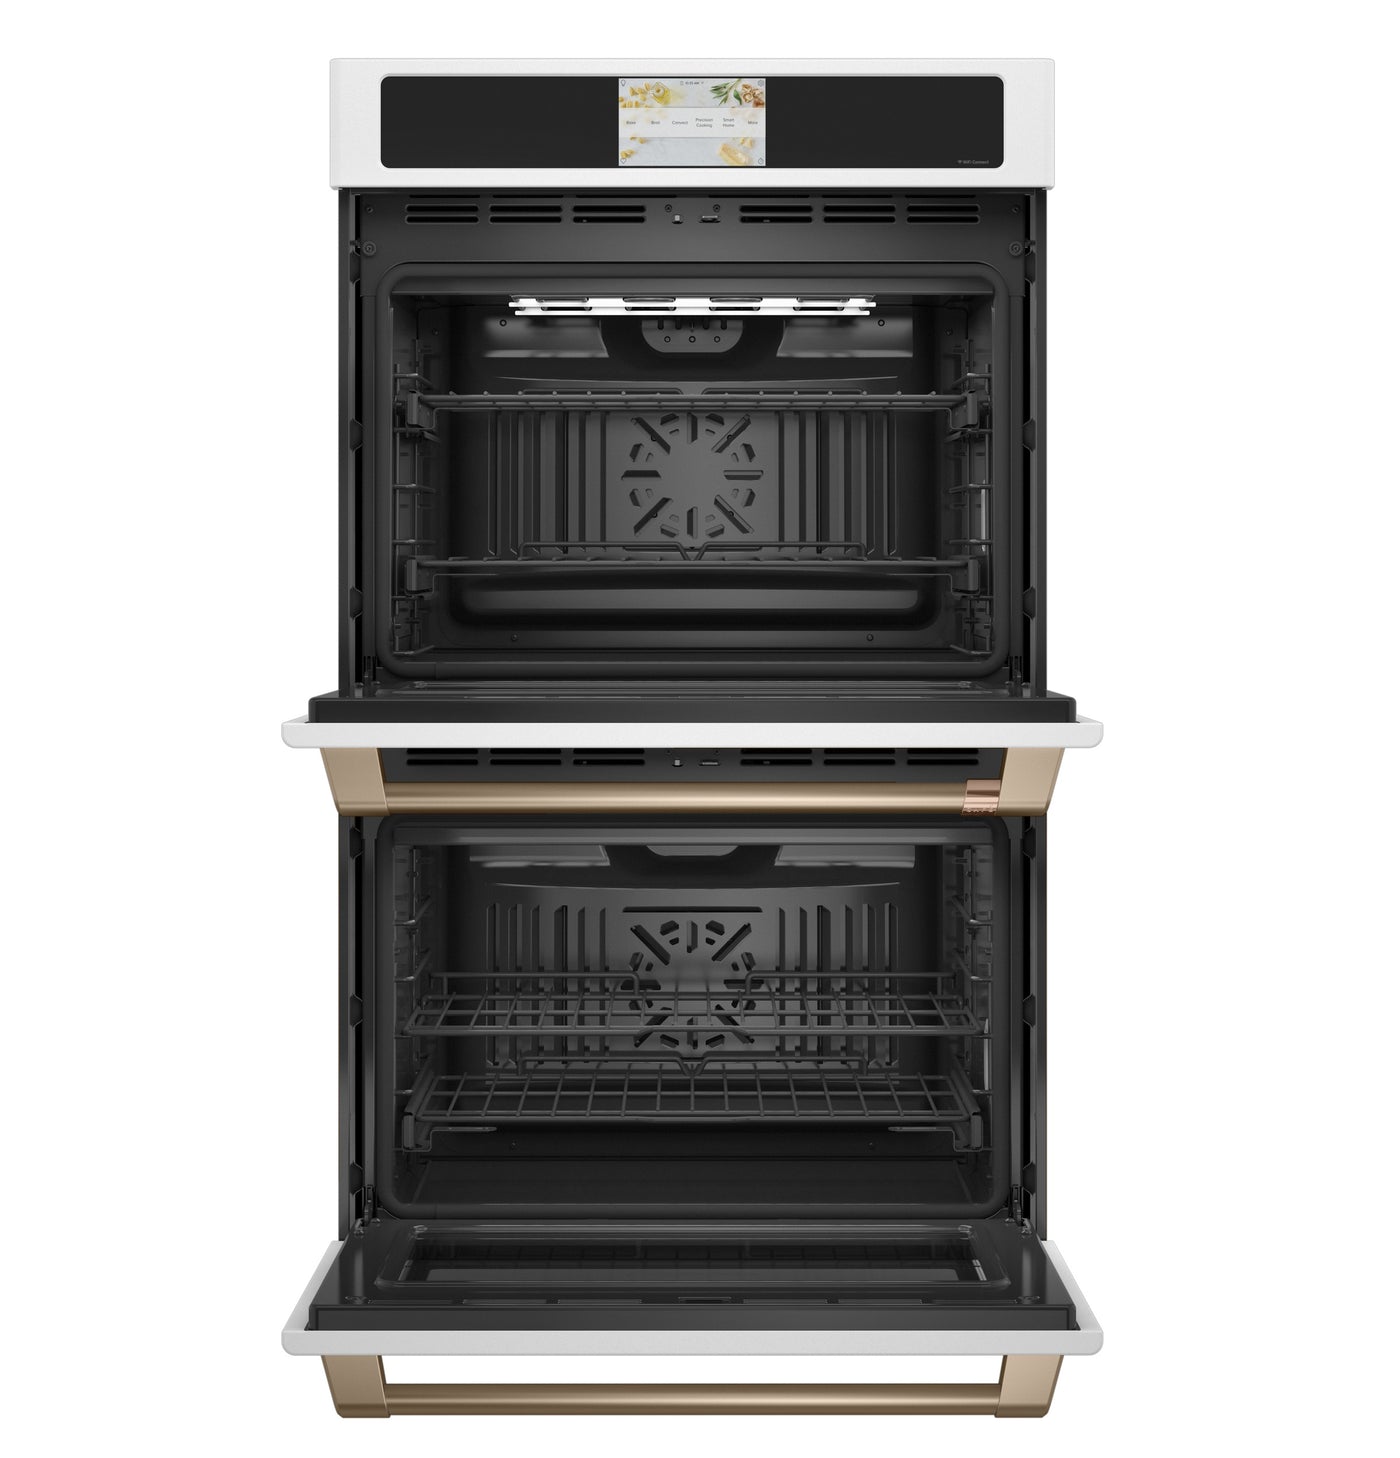 Café Matte White 30" Built-In Convection Double Wall Oven (10 Cu.Ft) - CTD90DP4NW2